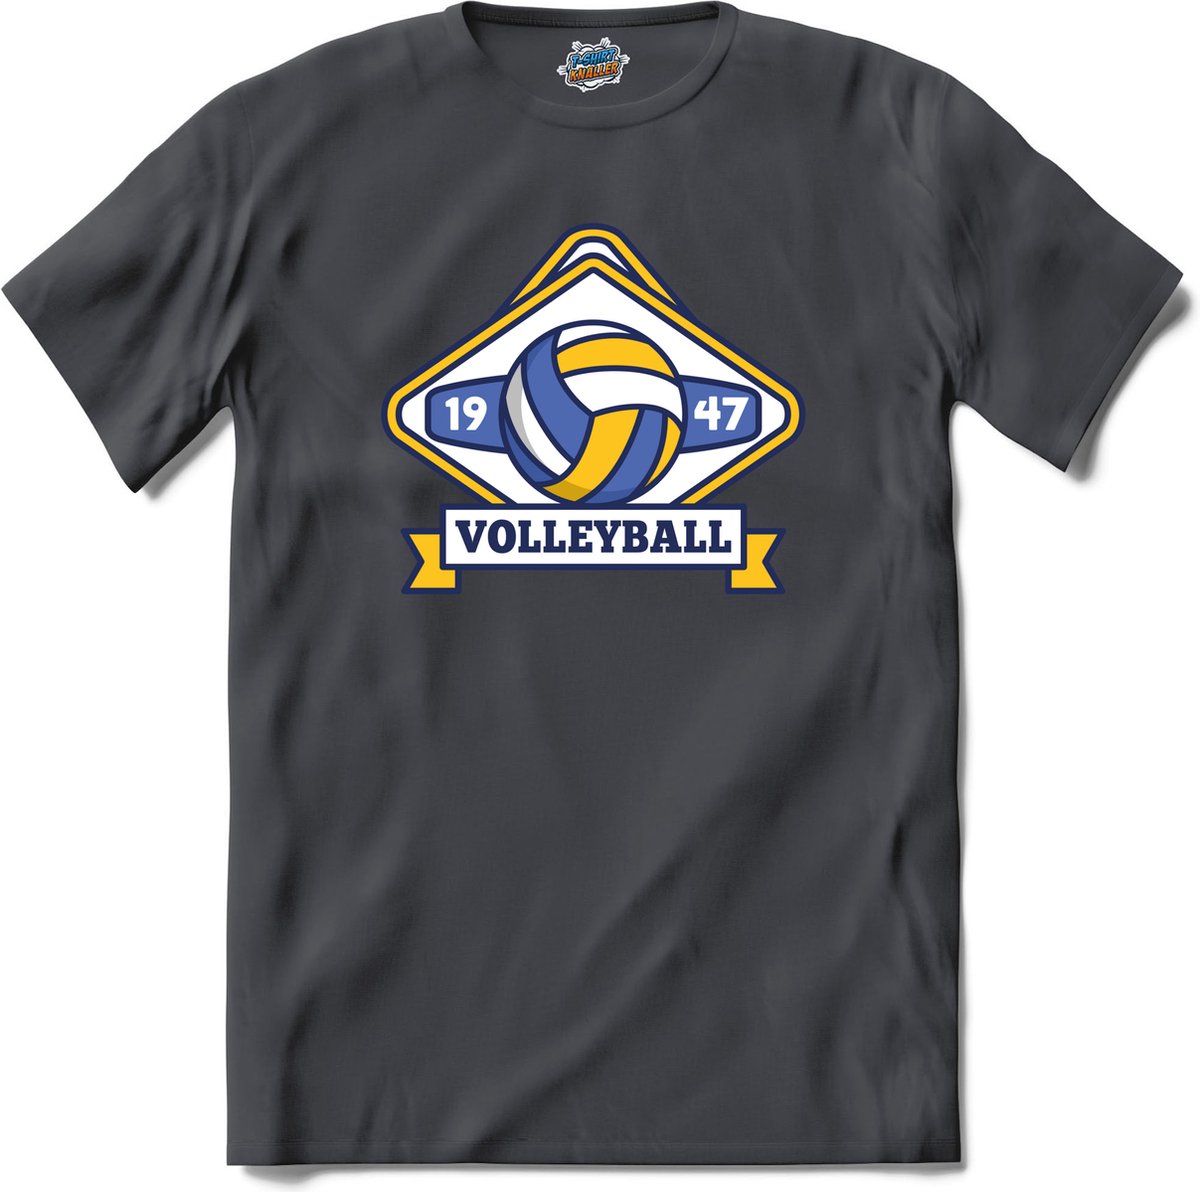 Volleybal sport - T-Shirt - Dames - Mouse Grey - Maat M